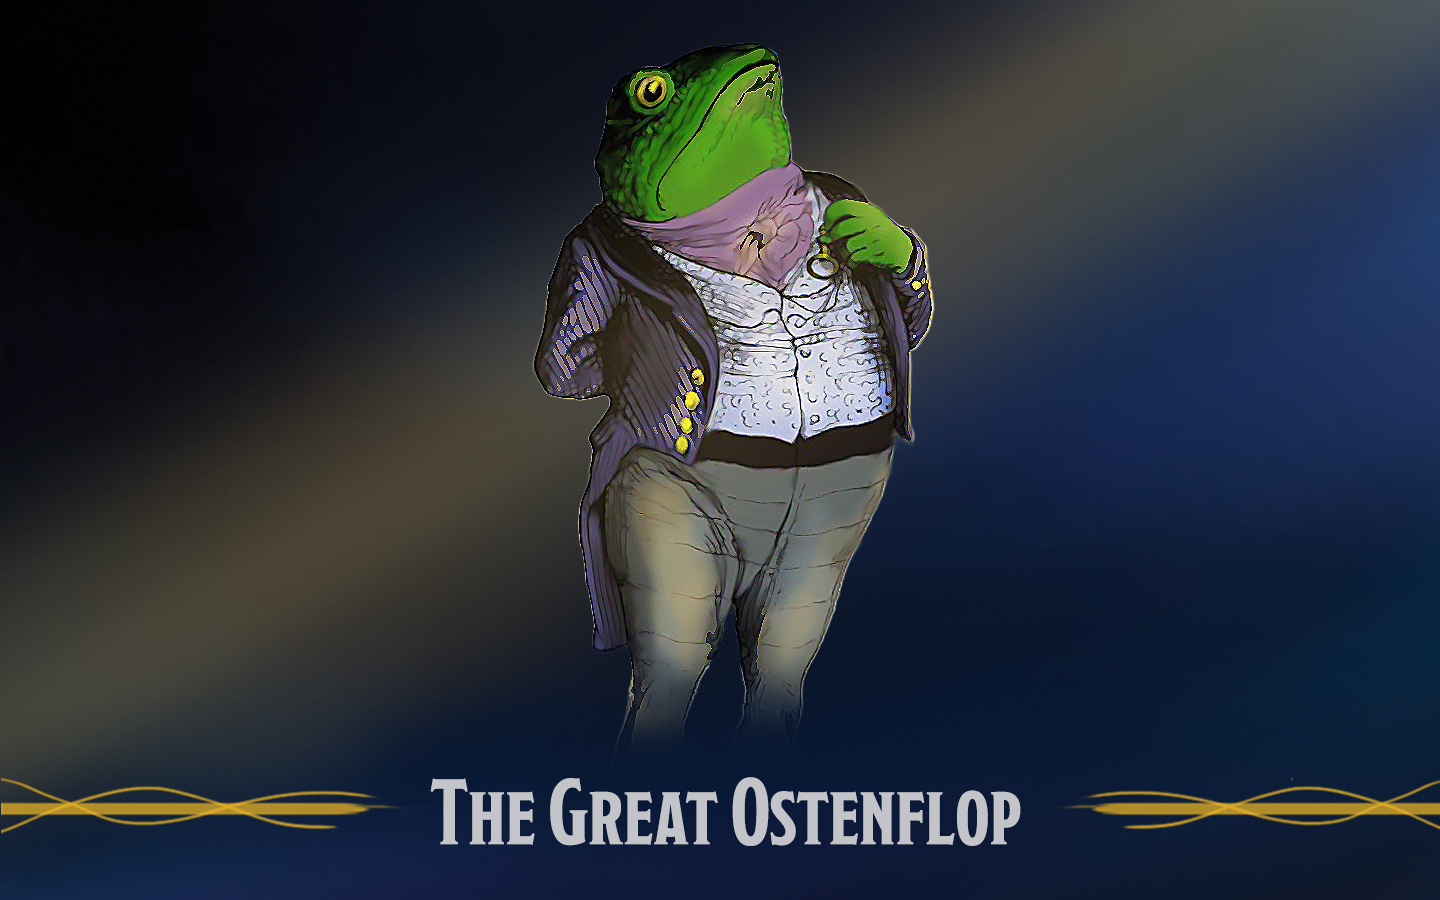 The Great Ostenflop — A singer with a binding voice